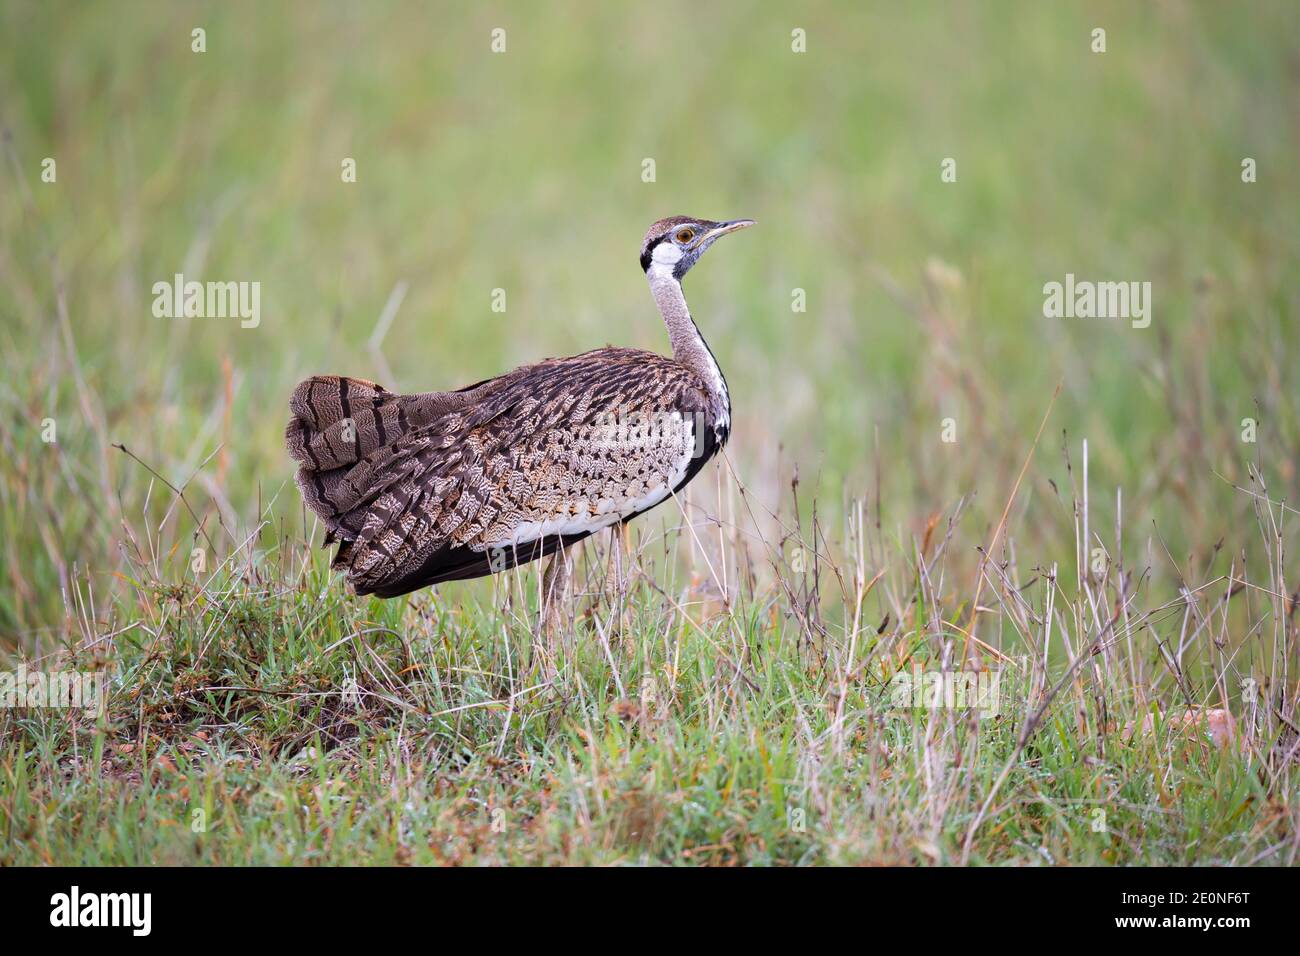 One indigenous gray bird is standing in the grass and looking. Stock Photo